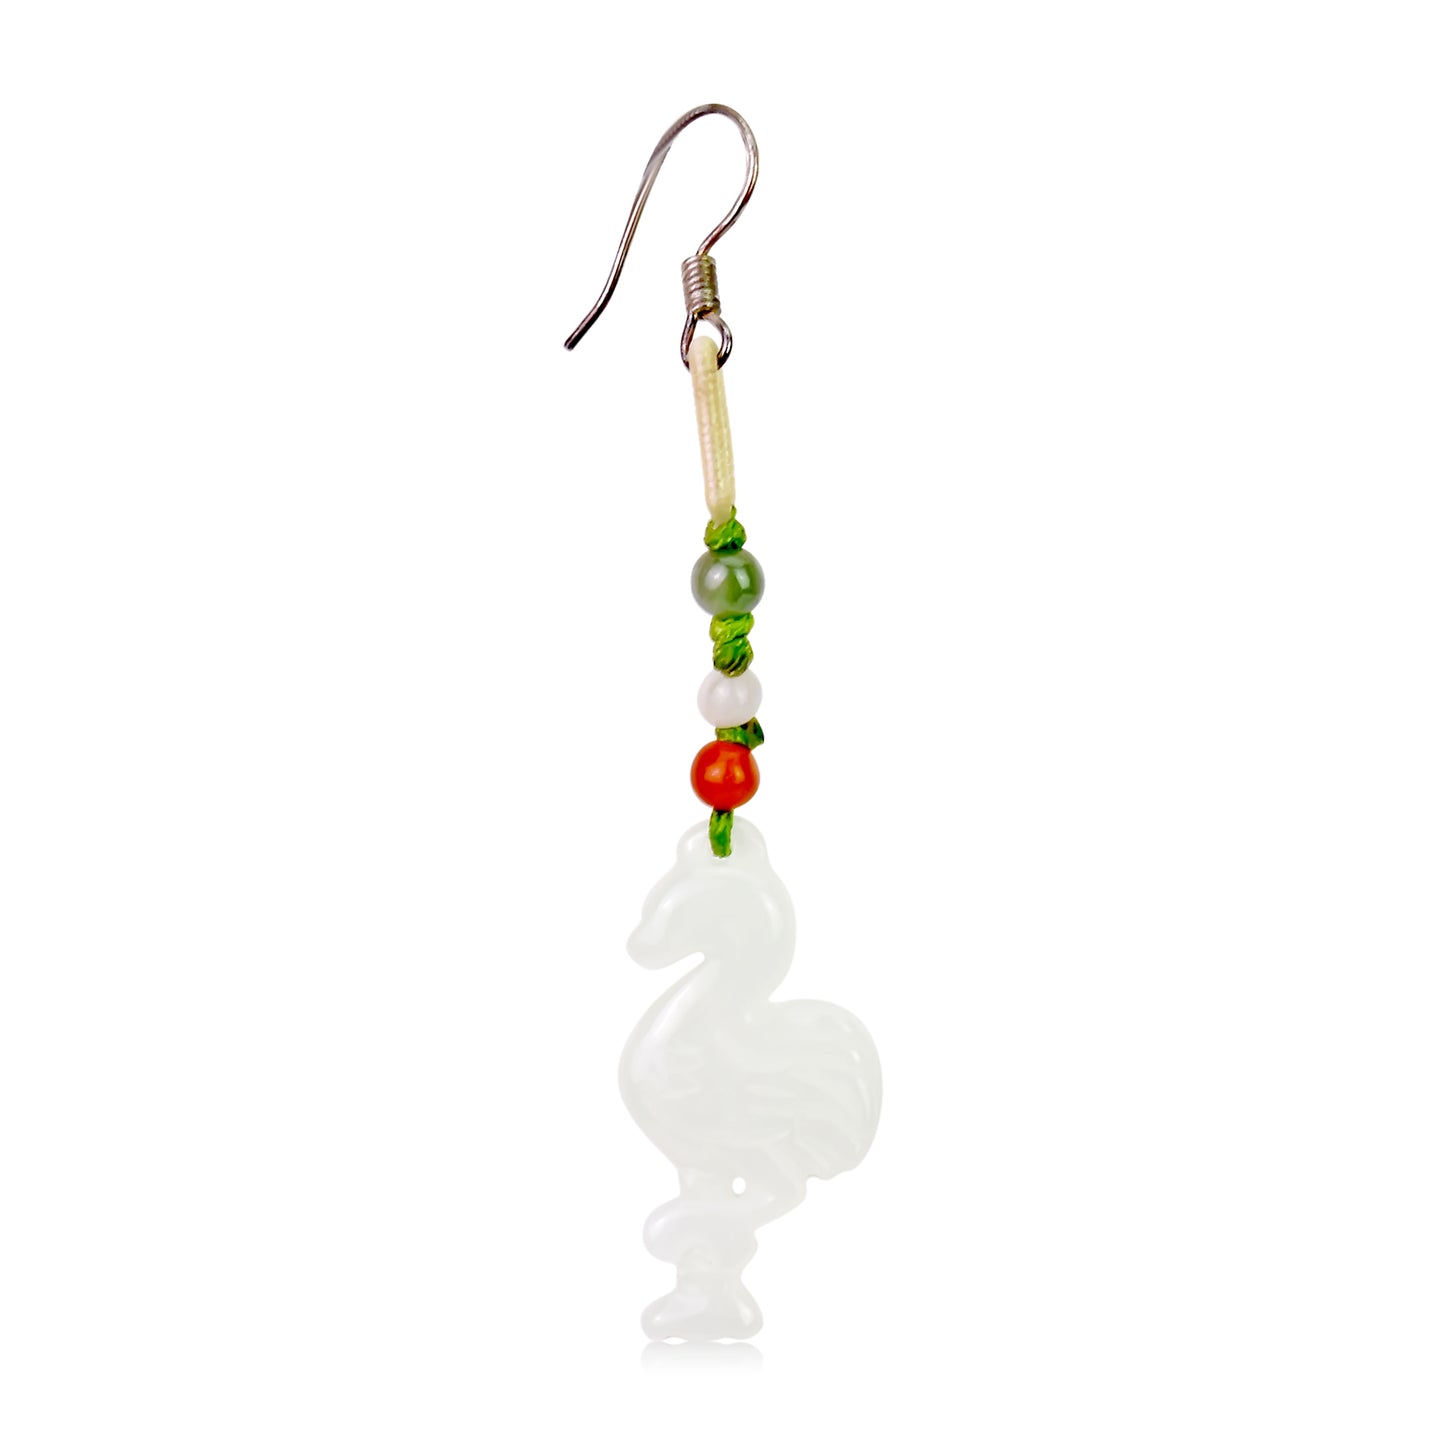 Feel Unique and Beautiful with Flamingo Handmade Jade Earrings made with Lime Cord